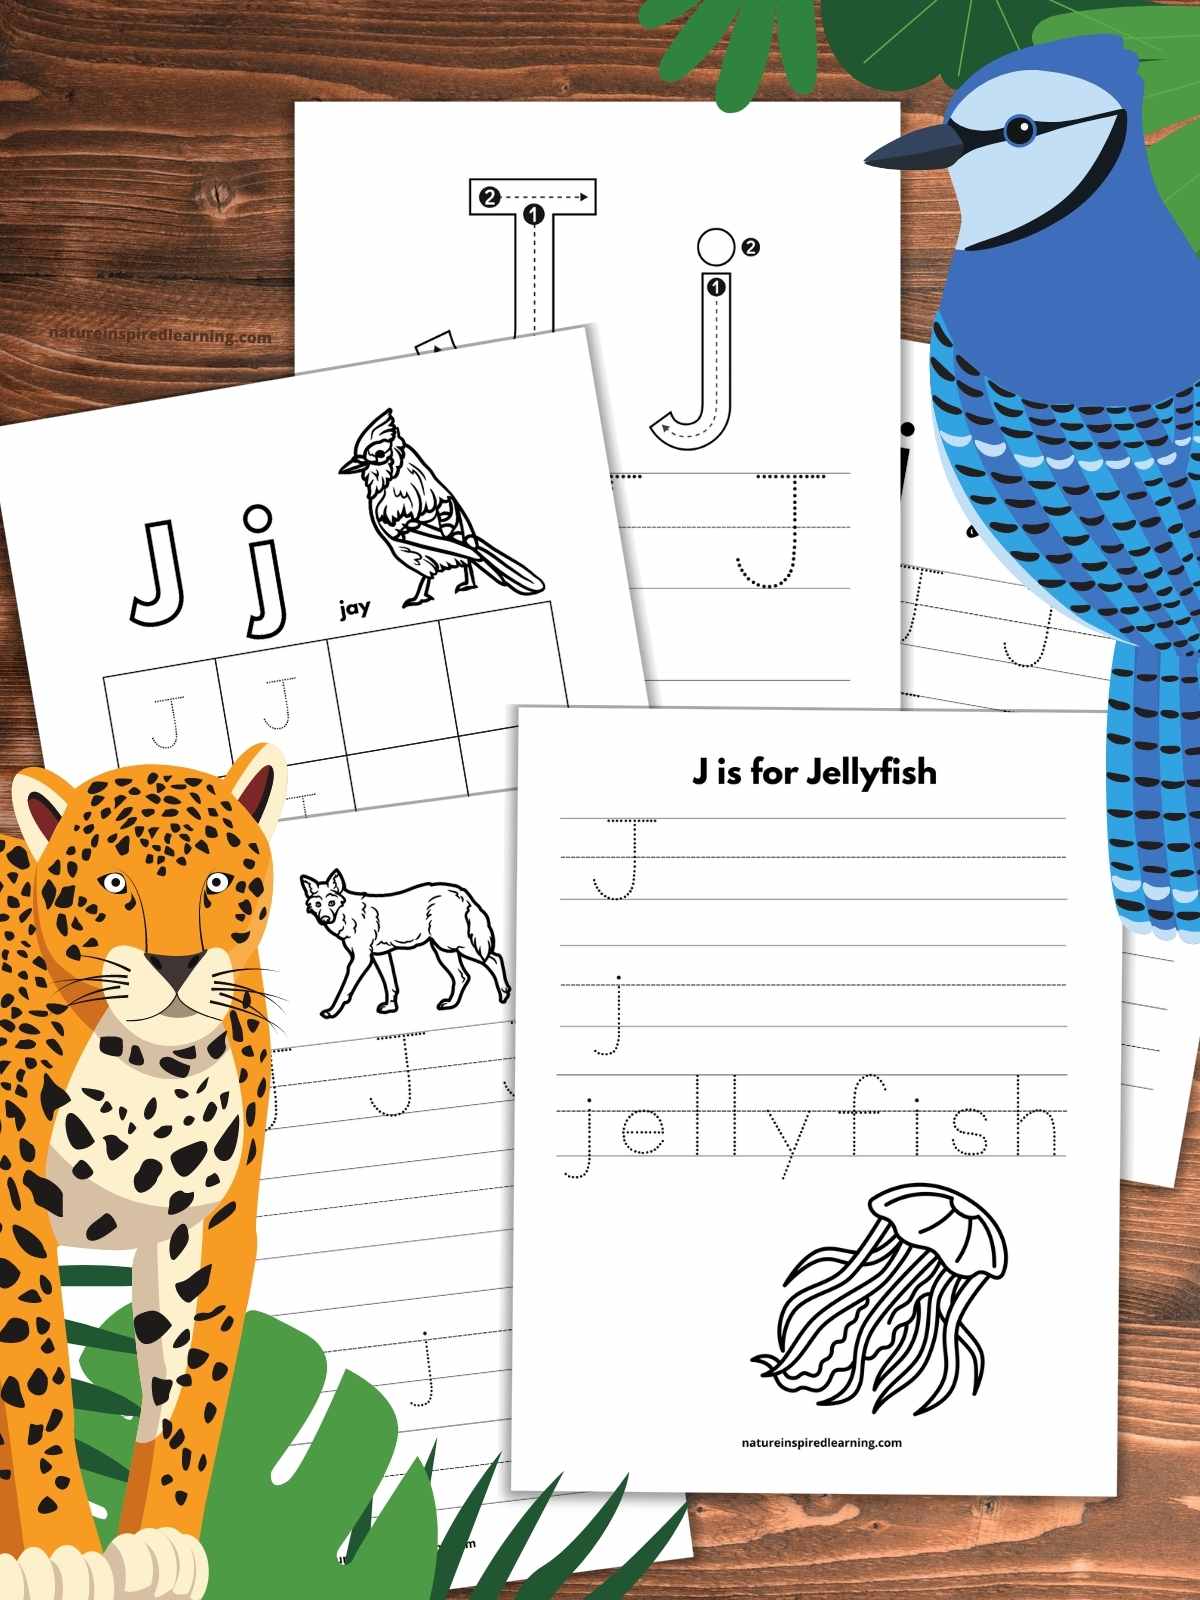 Five different letter j tracing worksheets overlapping on a wooden background with a blue jay upper right with green leaves and jaguar lower left with leaves.